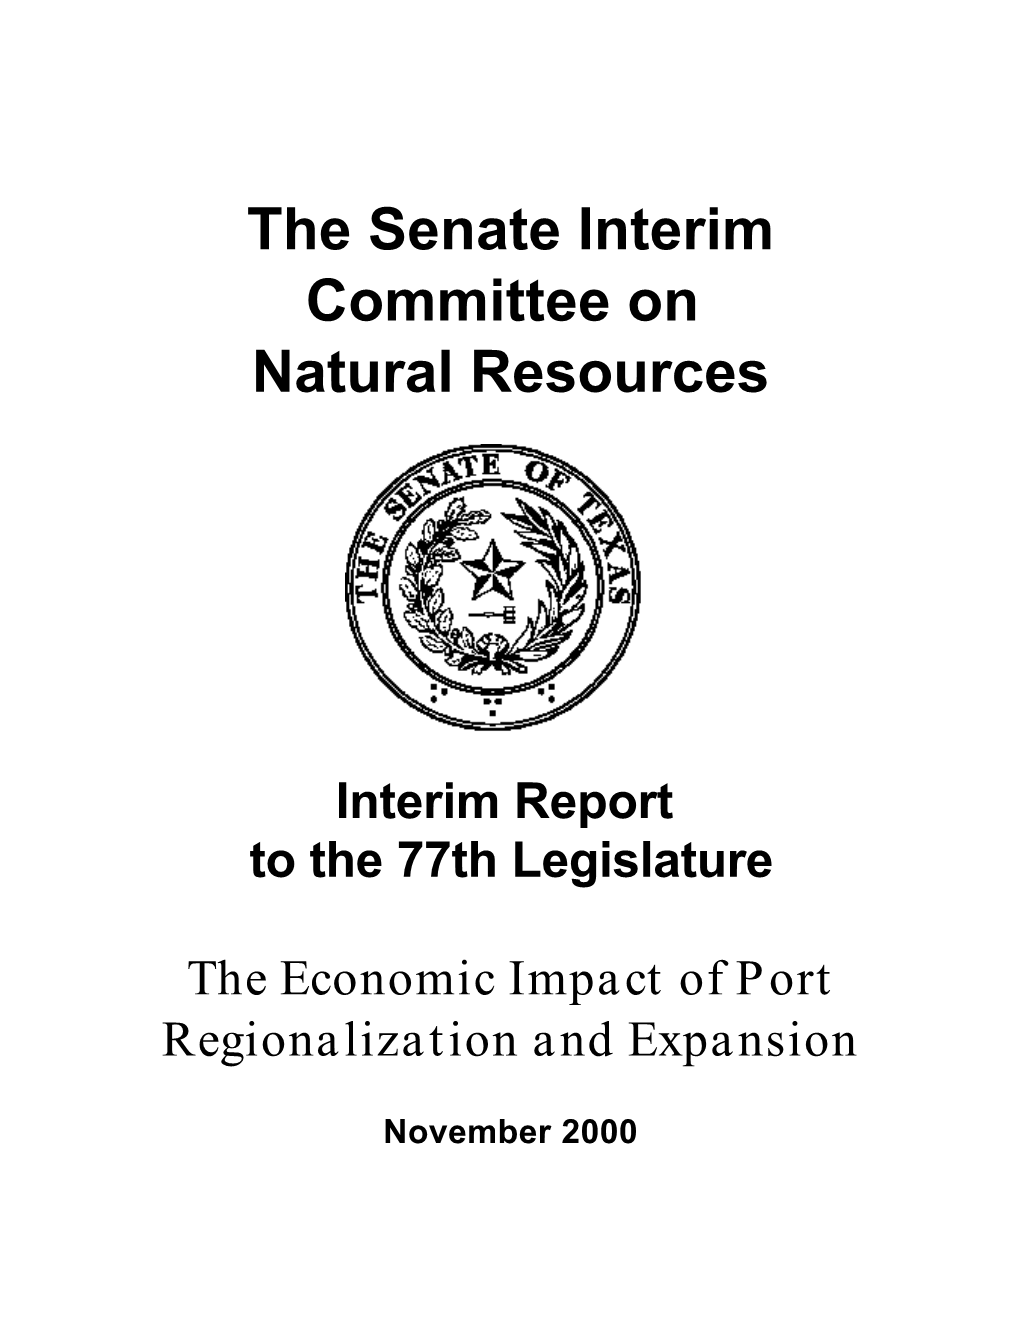 The Senate Interim Committee on Natural Resources